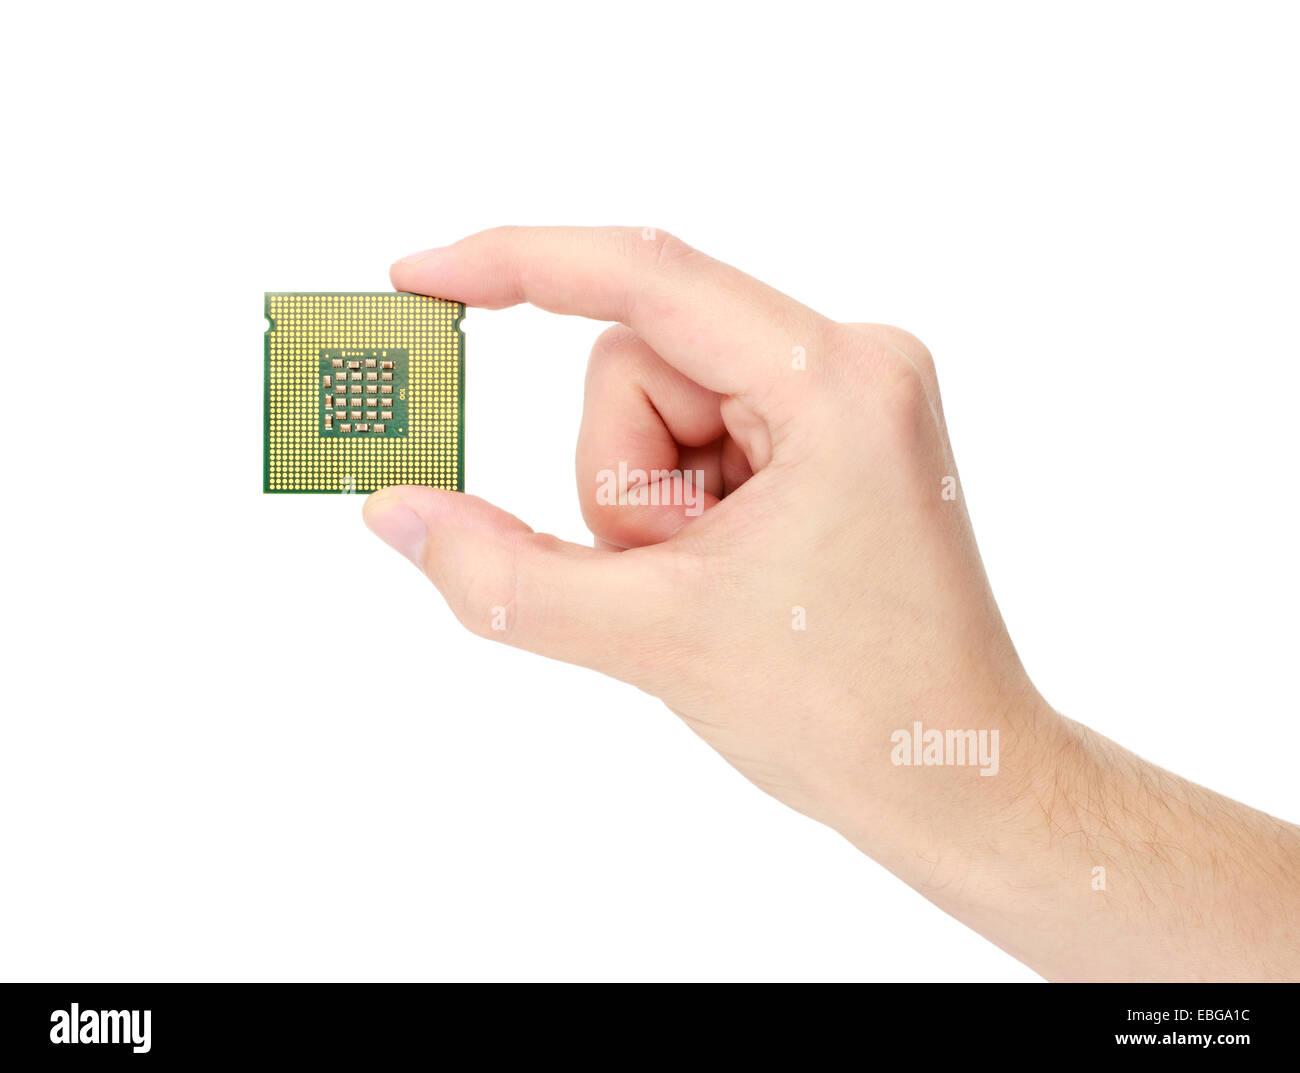 Processor in hand on white background isolate Stock Photo